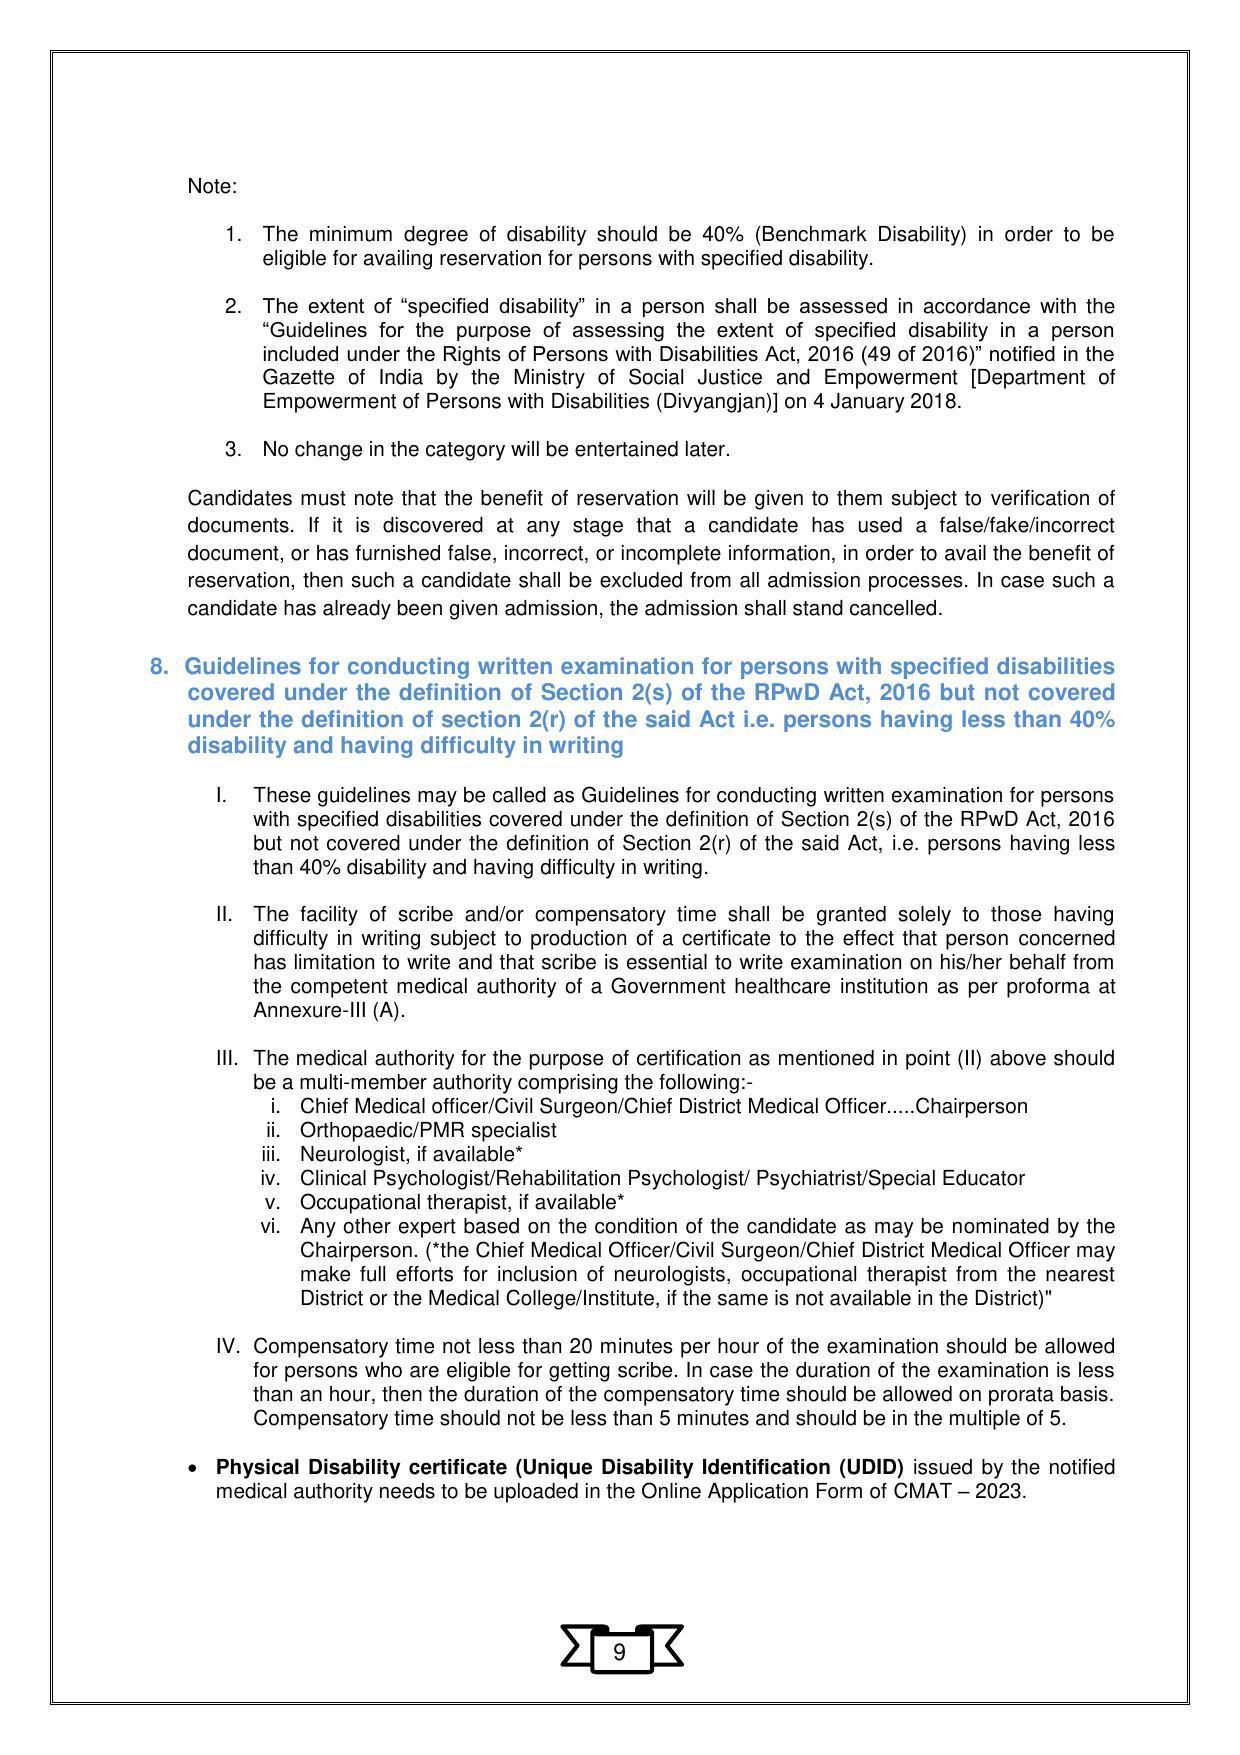 CMAT 2023 Information Bulletin - Page 12